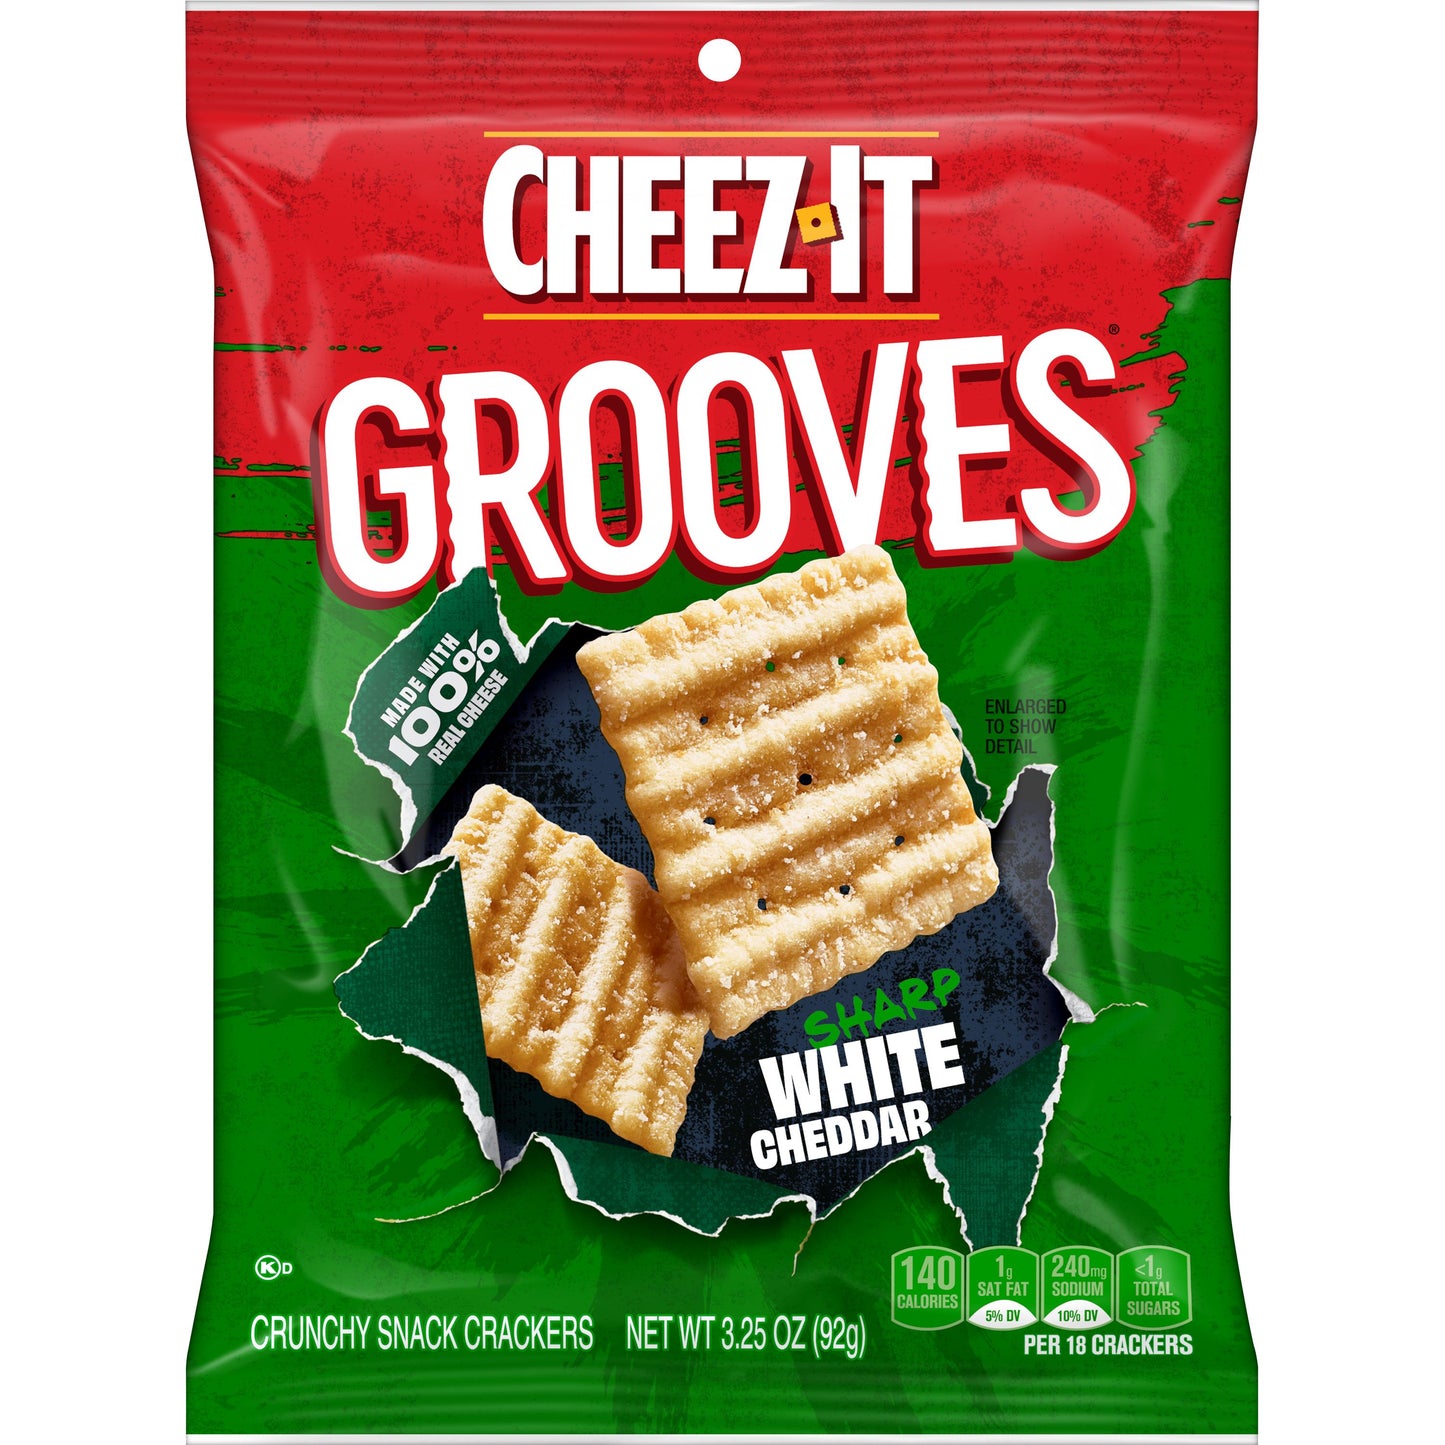 Cheez-It Grooves Sharp White Cheddar 3.25oz 6ct